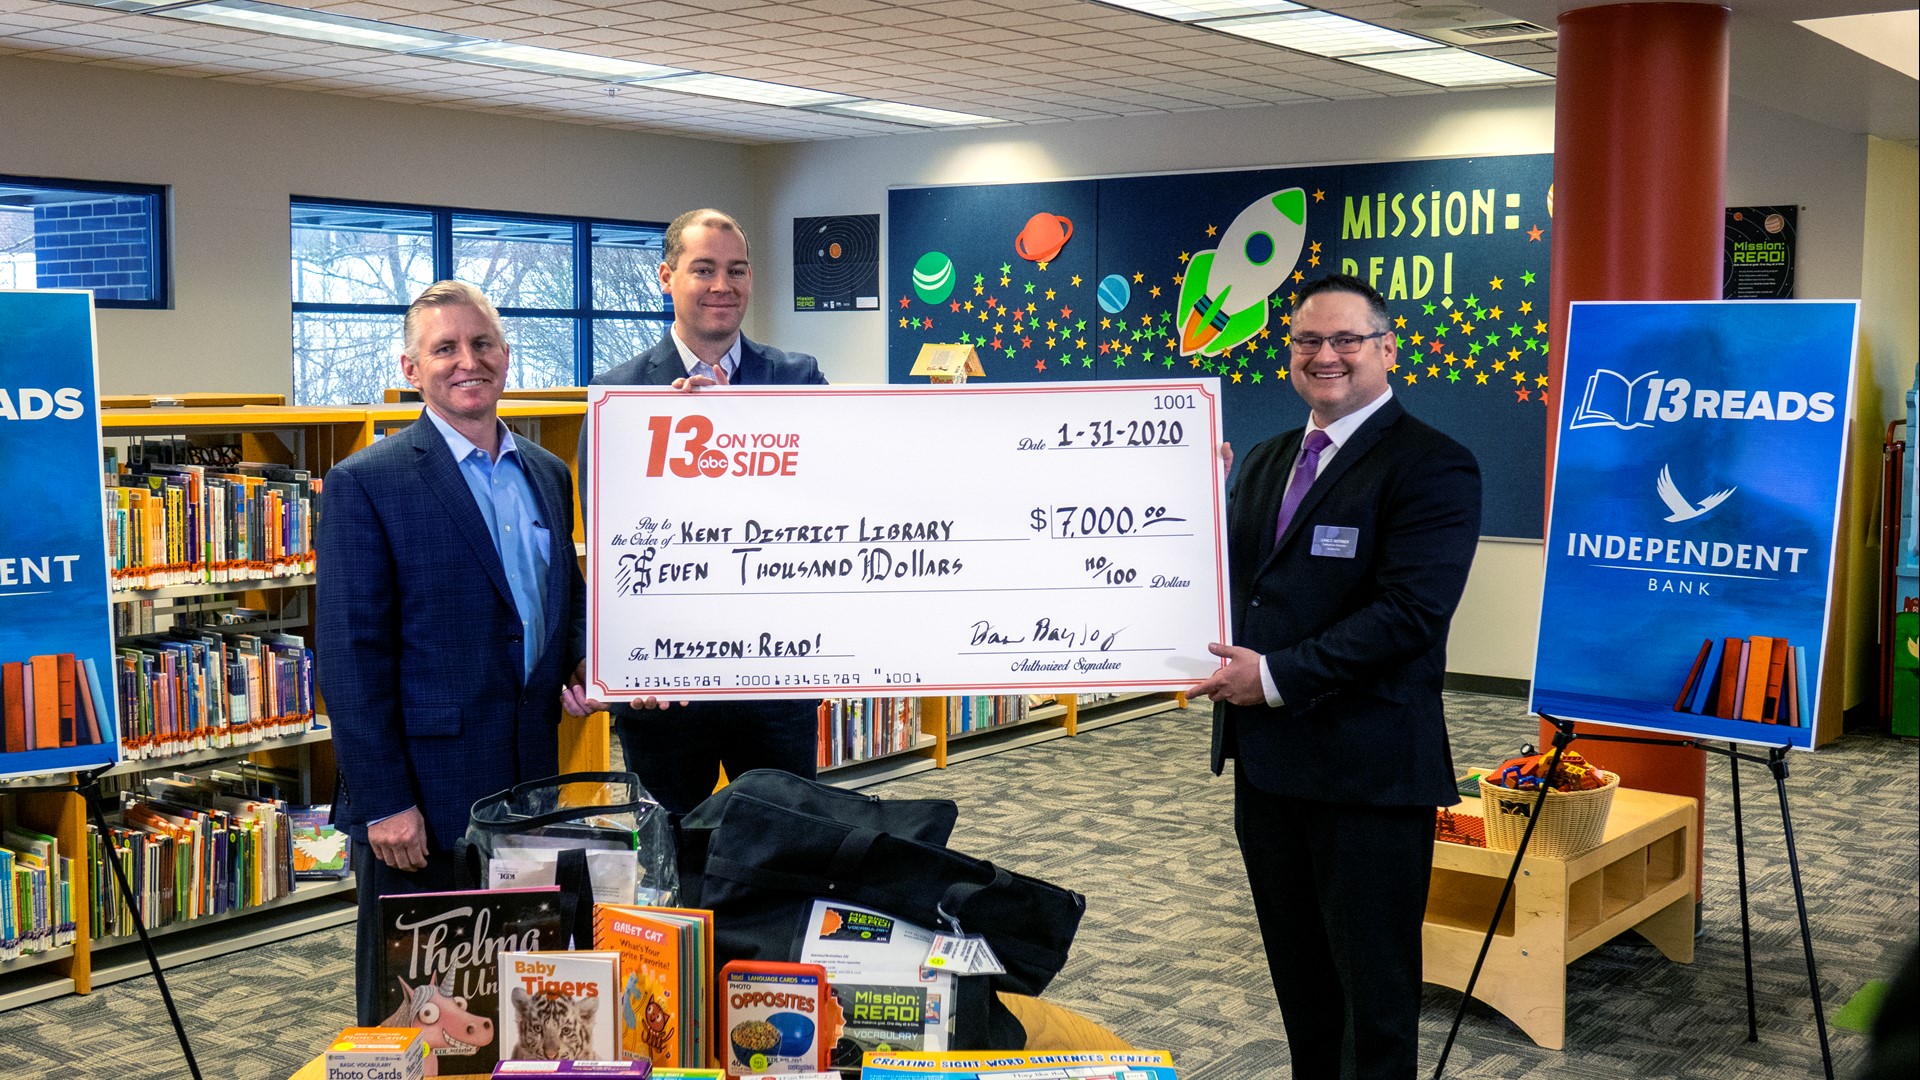 13 ON YOUR SIDE and Independent Bank have come together to present the Kent District Library with funds that will improve community literacy.